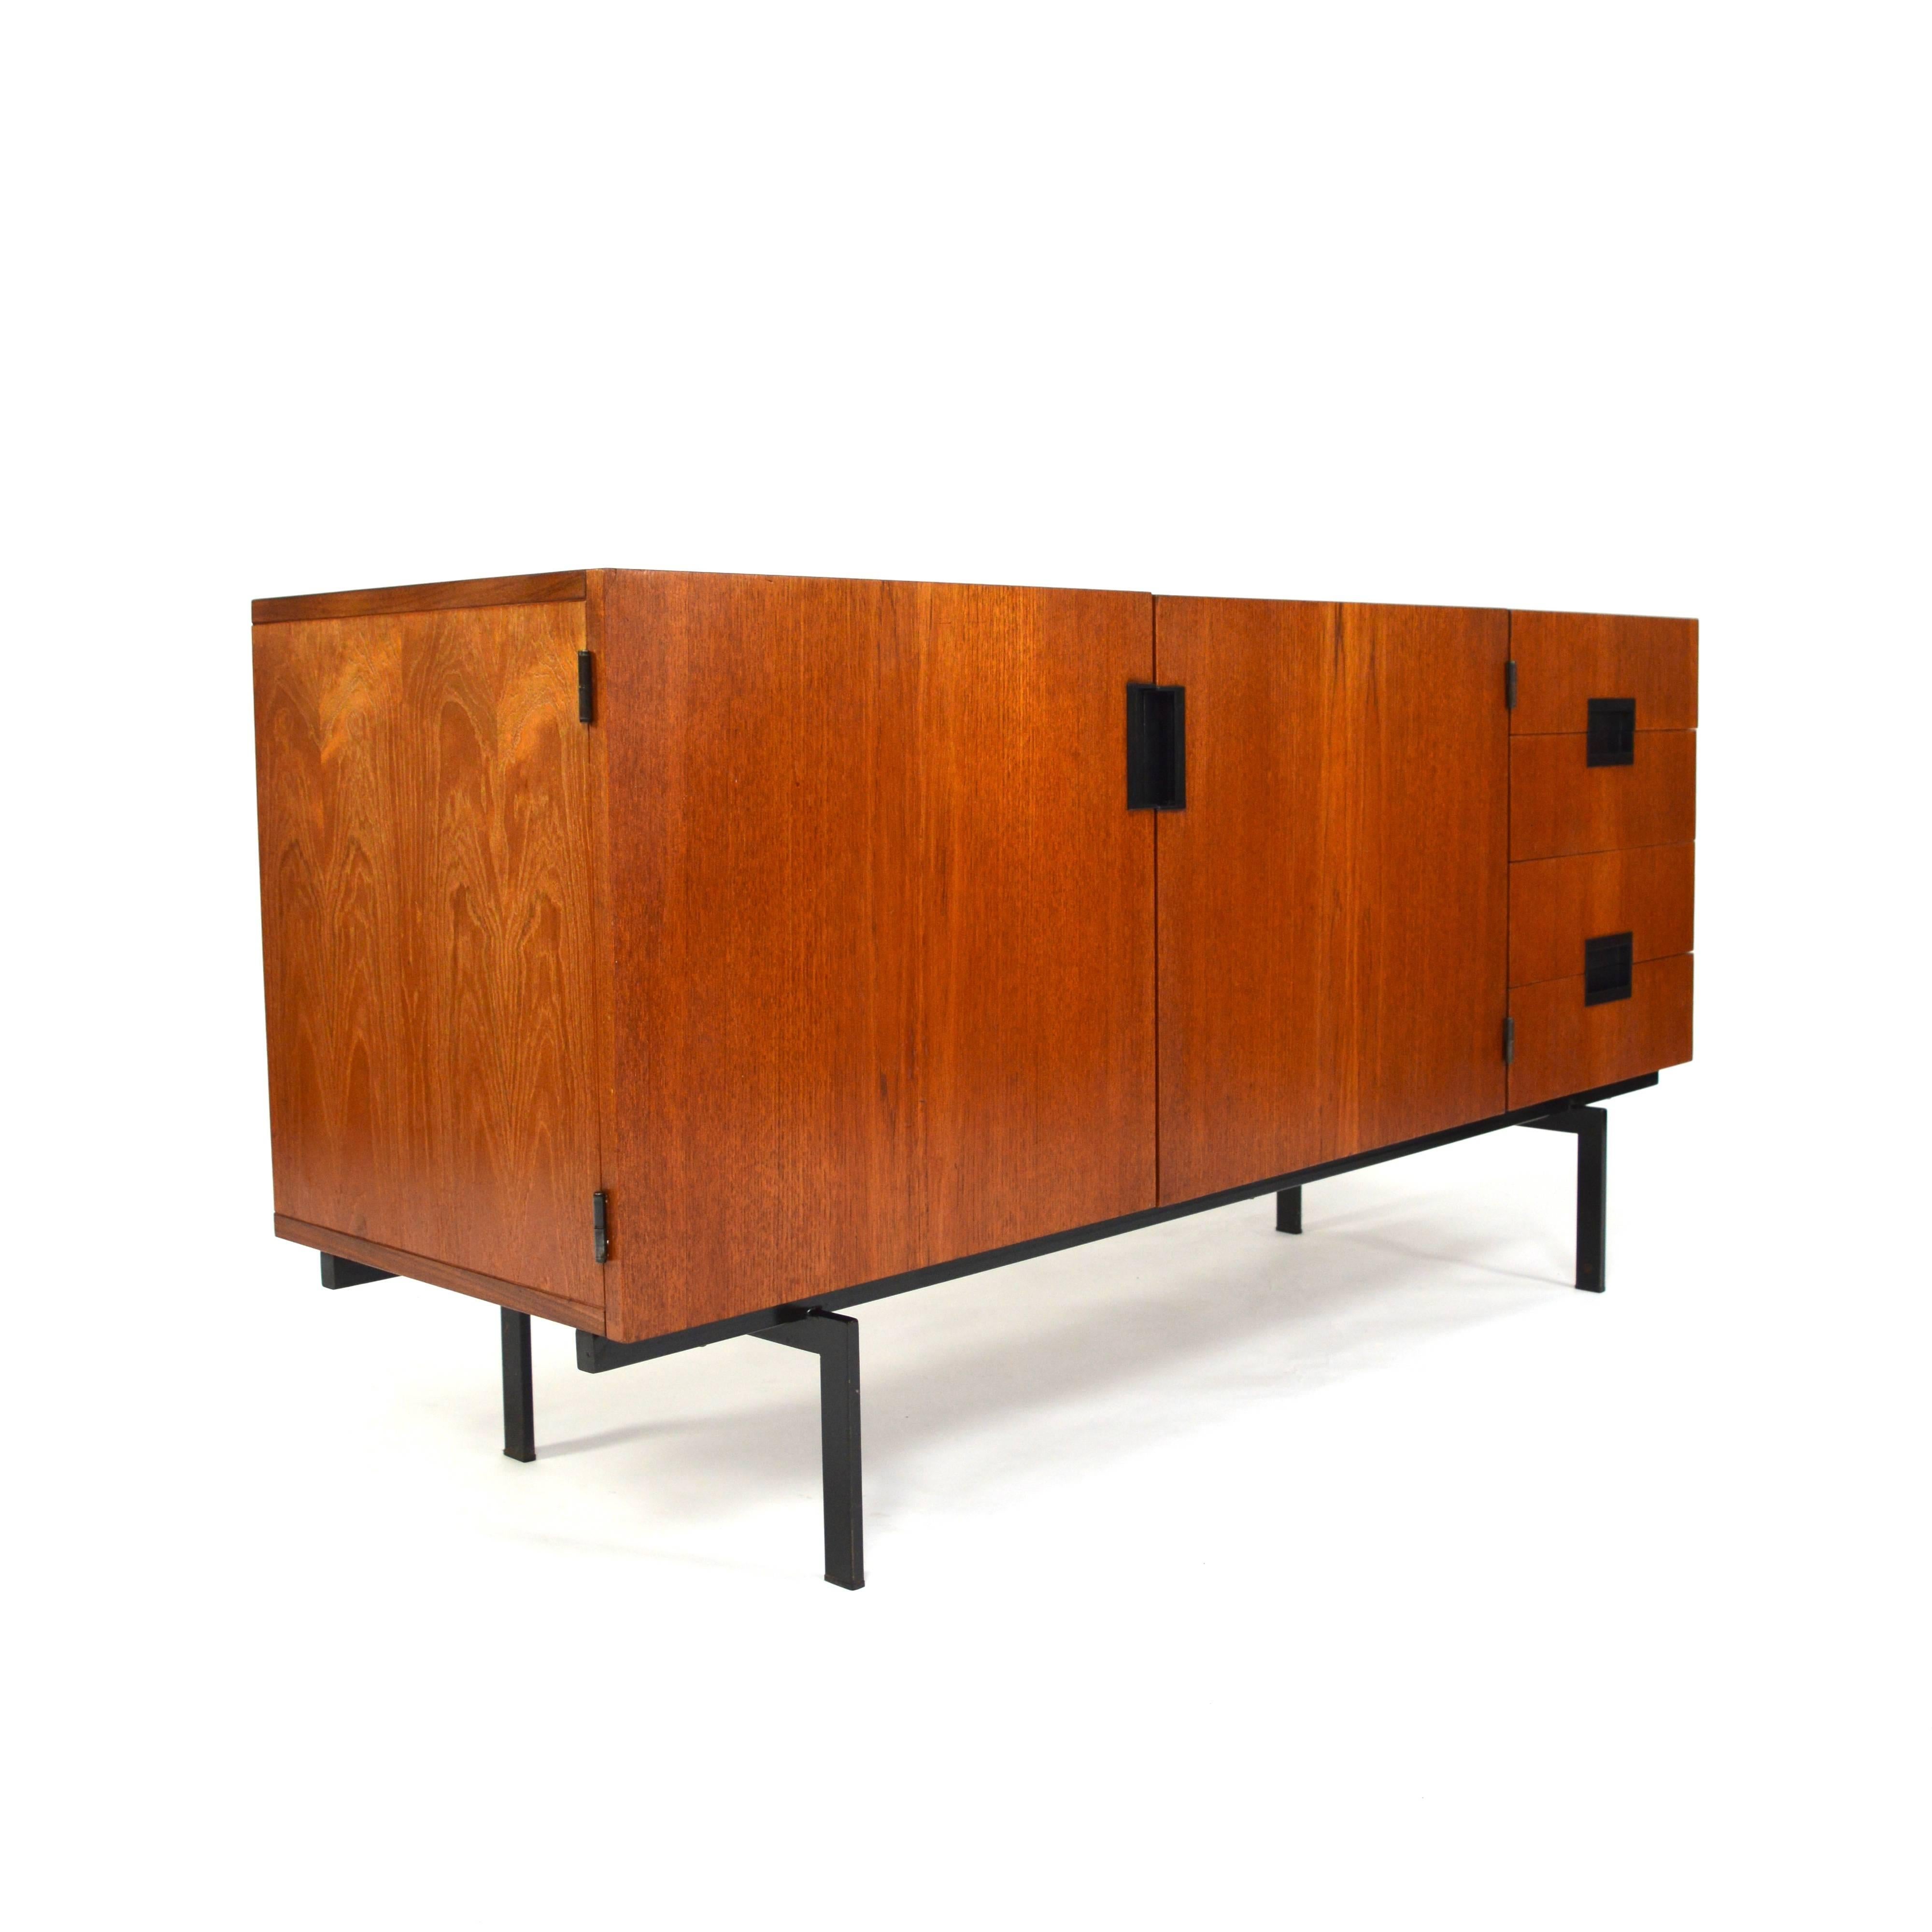 Rare size DU-01 Japanese series sideboard by Cees Braakman.
Teak with black lacquered metal base.
The inside of the drawers is beautifully made of bent plywood.
In excellent condition. Small restoration on top of the left door.
  